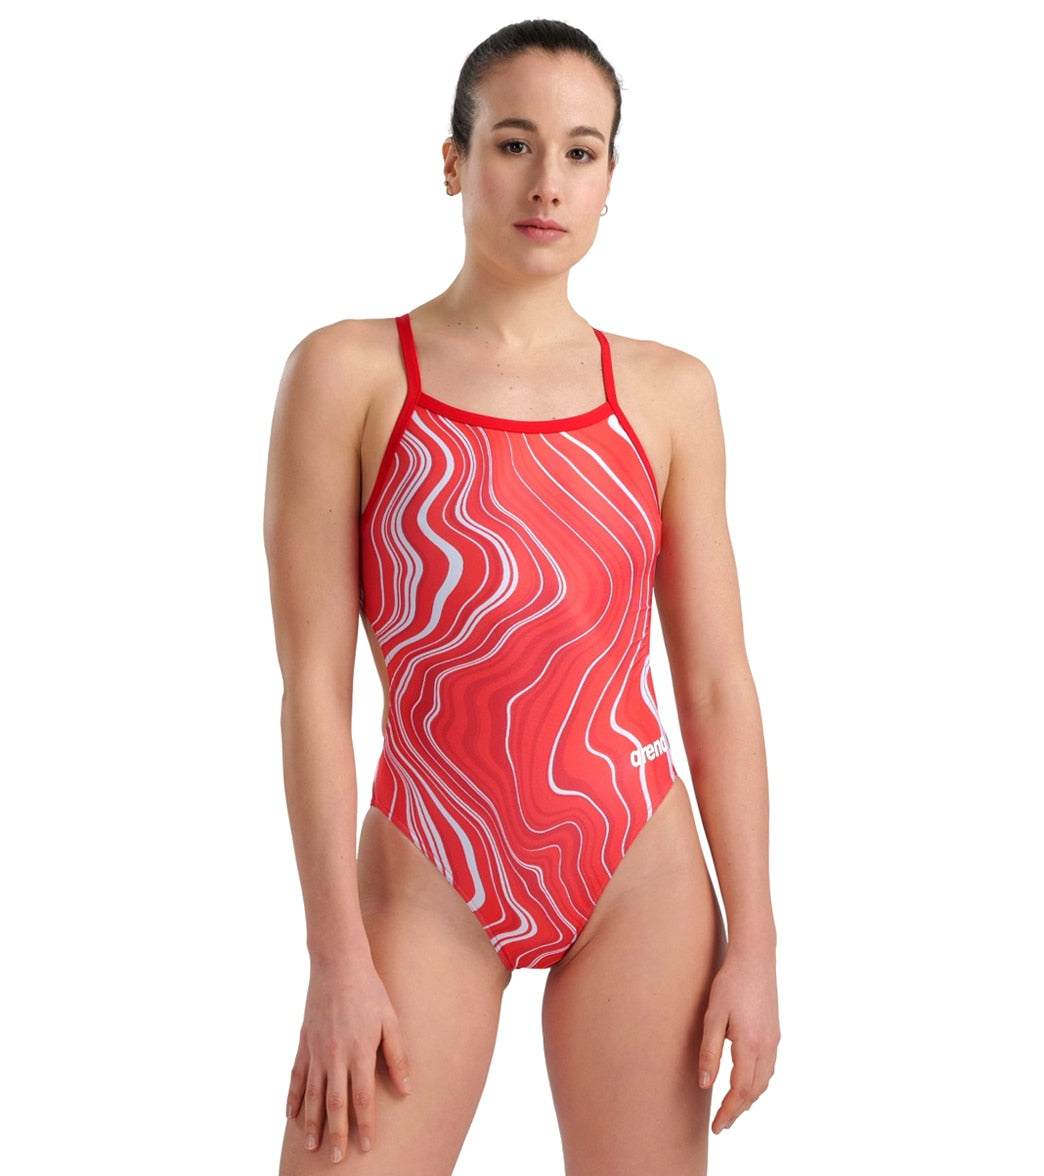 Arena Womens Marbled Challenge Back One Piece Swimsuit